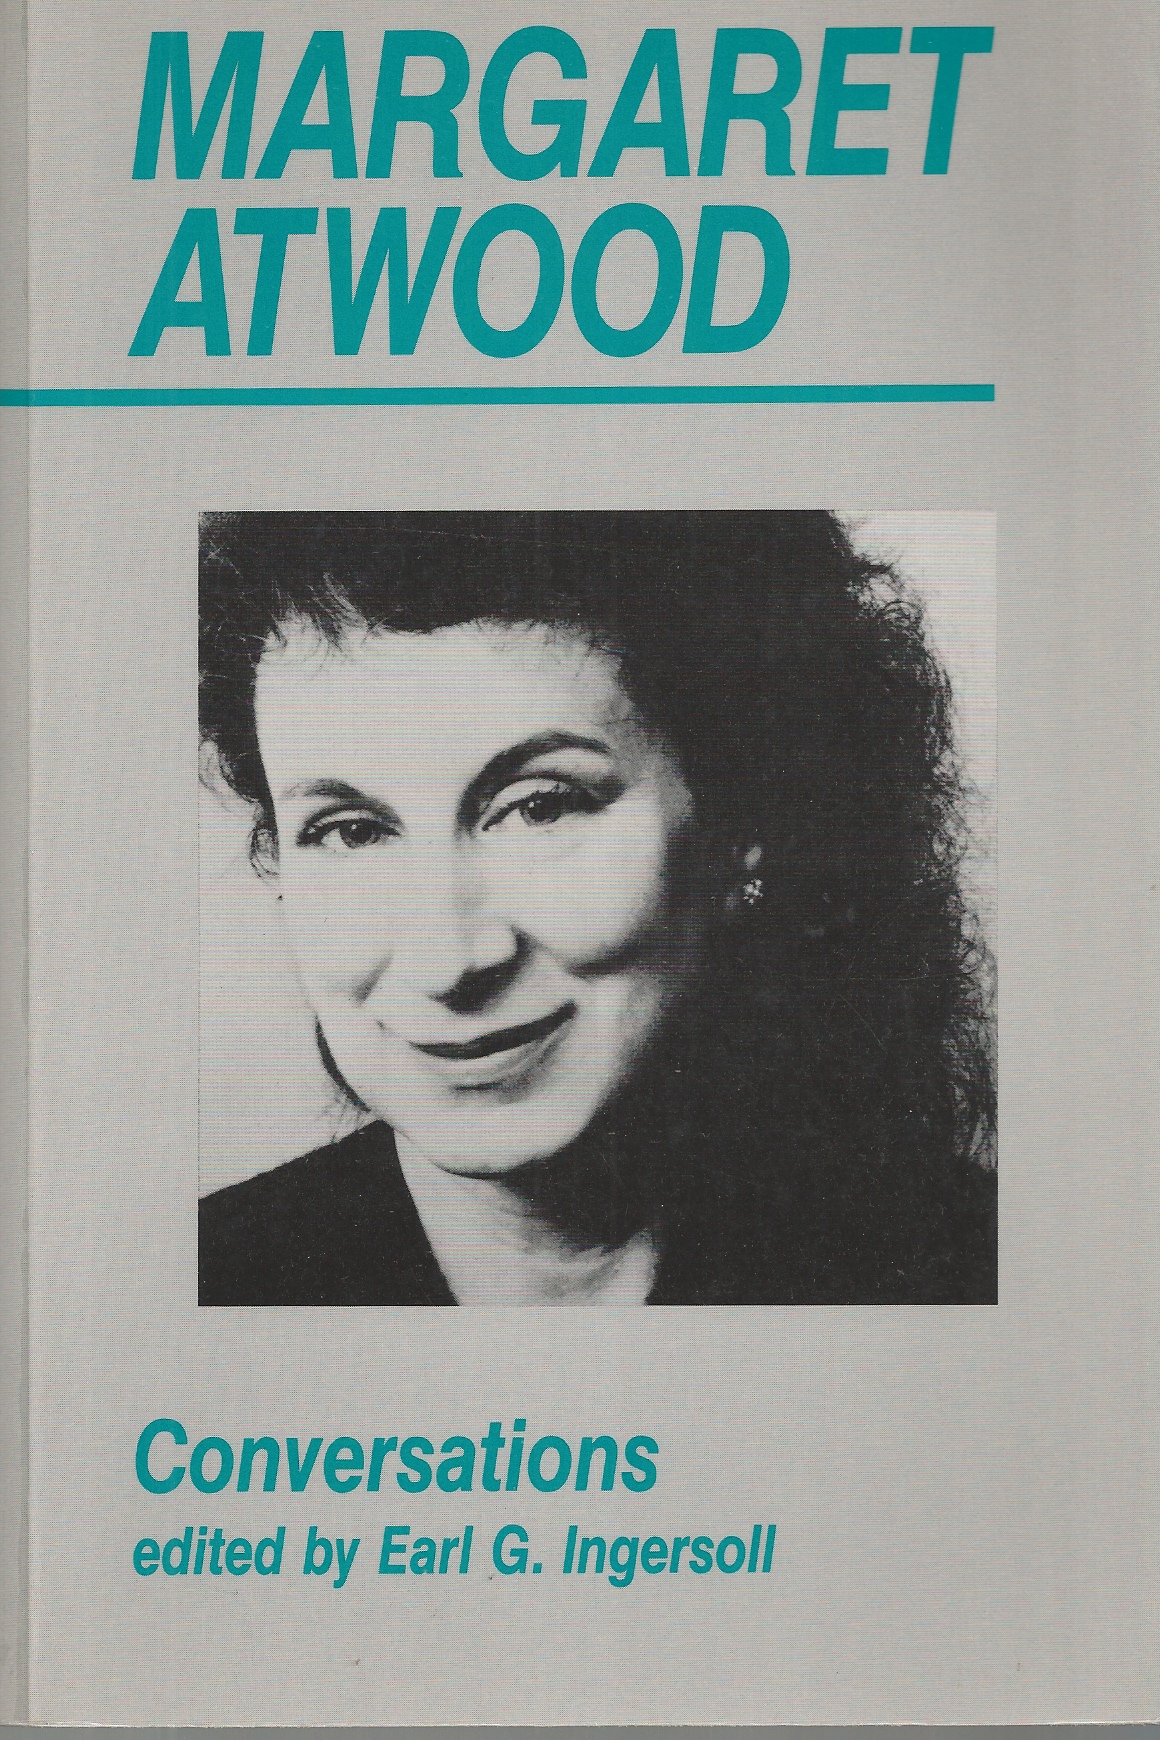 INGERSOLL, EARL G. (EDITOR) - Conversations: Margaret Atwood